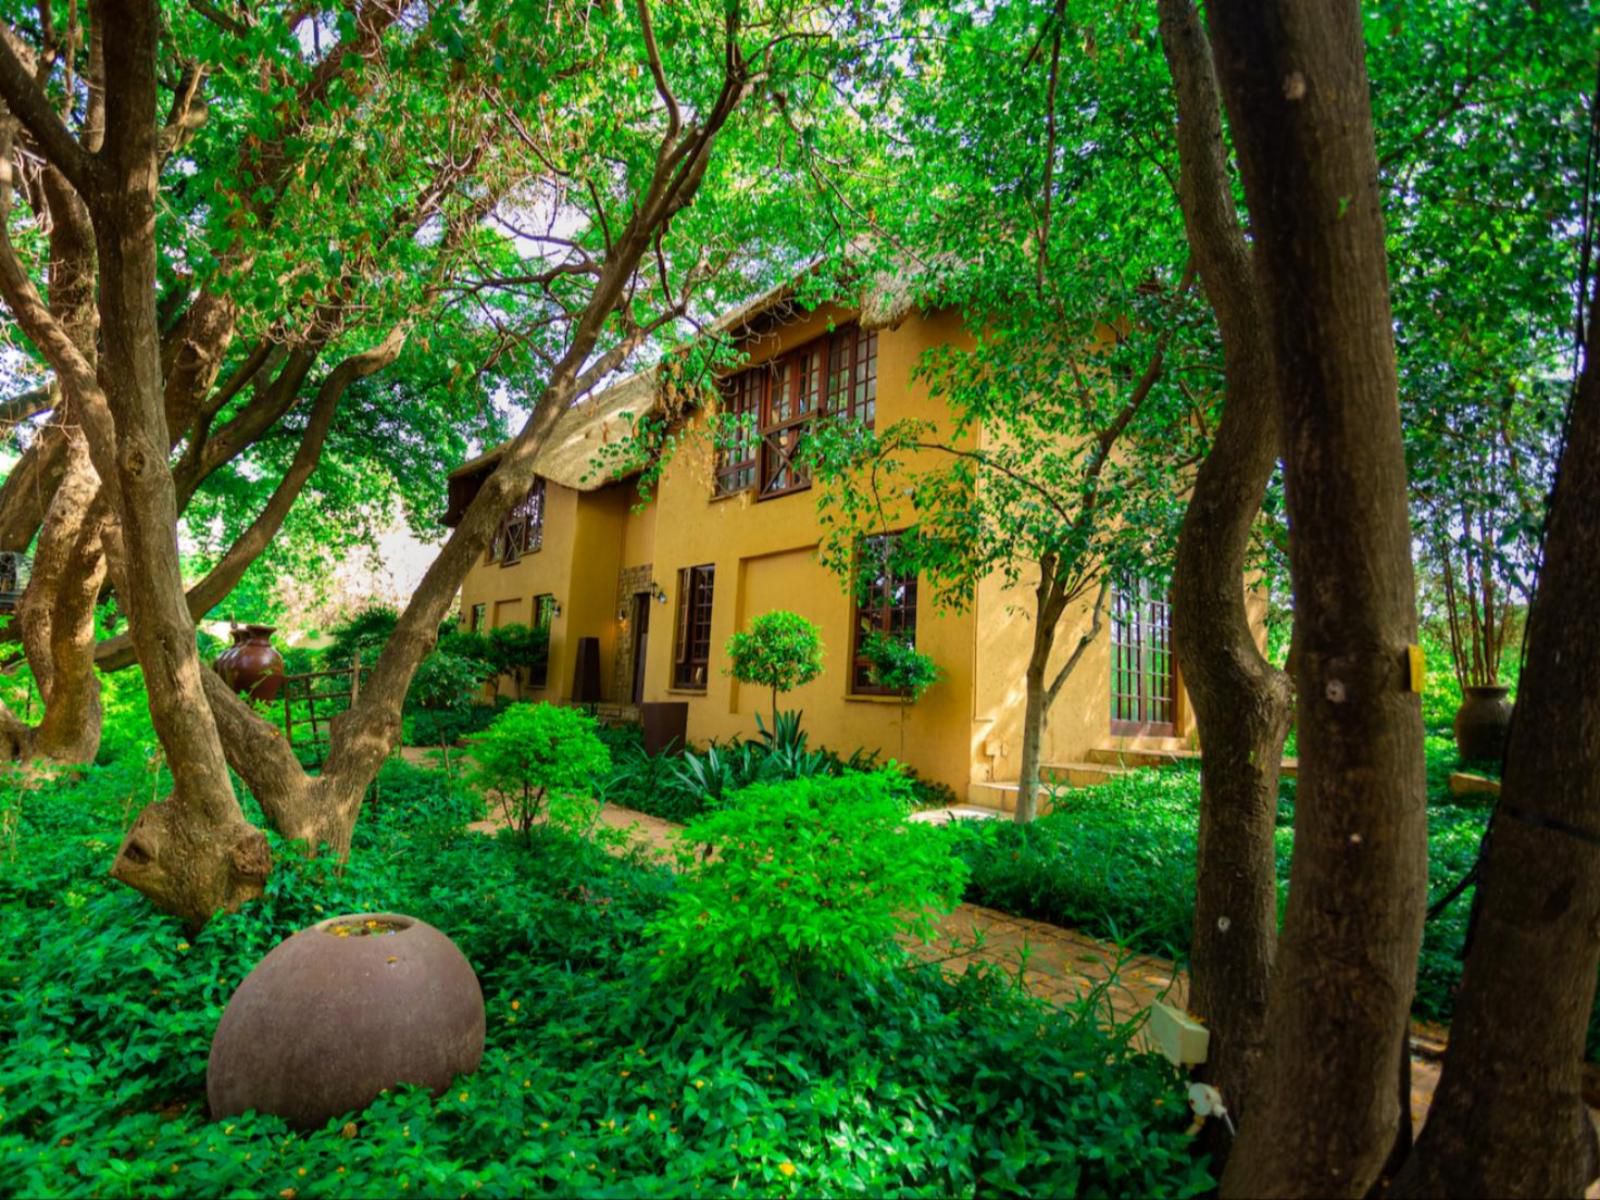 The Garden Venue Hotel North Riding Johannesburg Gauteng South Africa Colorful, House, Building, Architecture, Plant, Nature